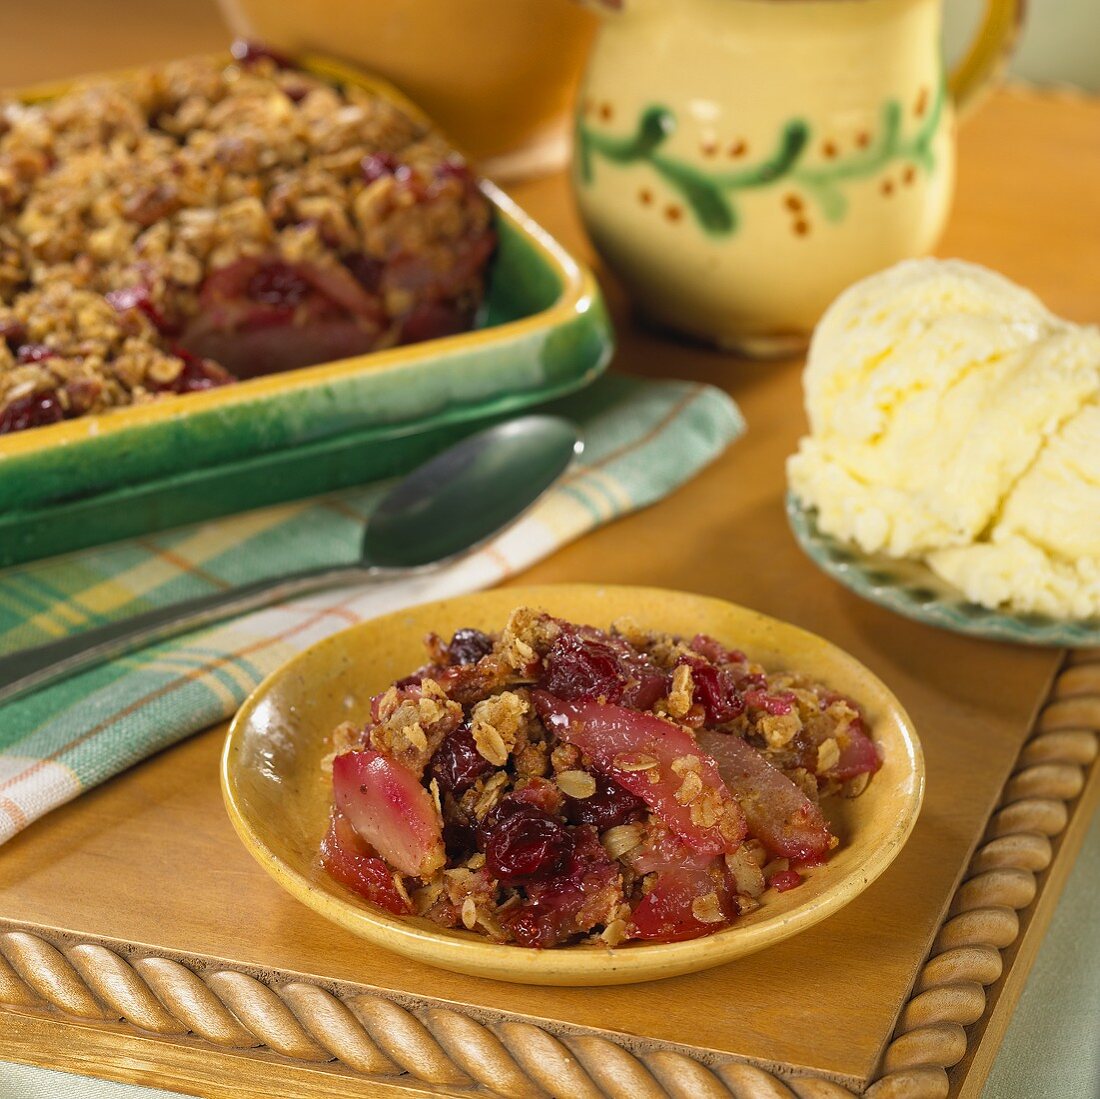 Cranberry-Pear Crisp with Oat Topping